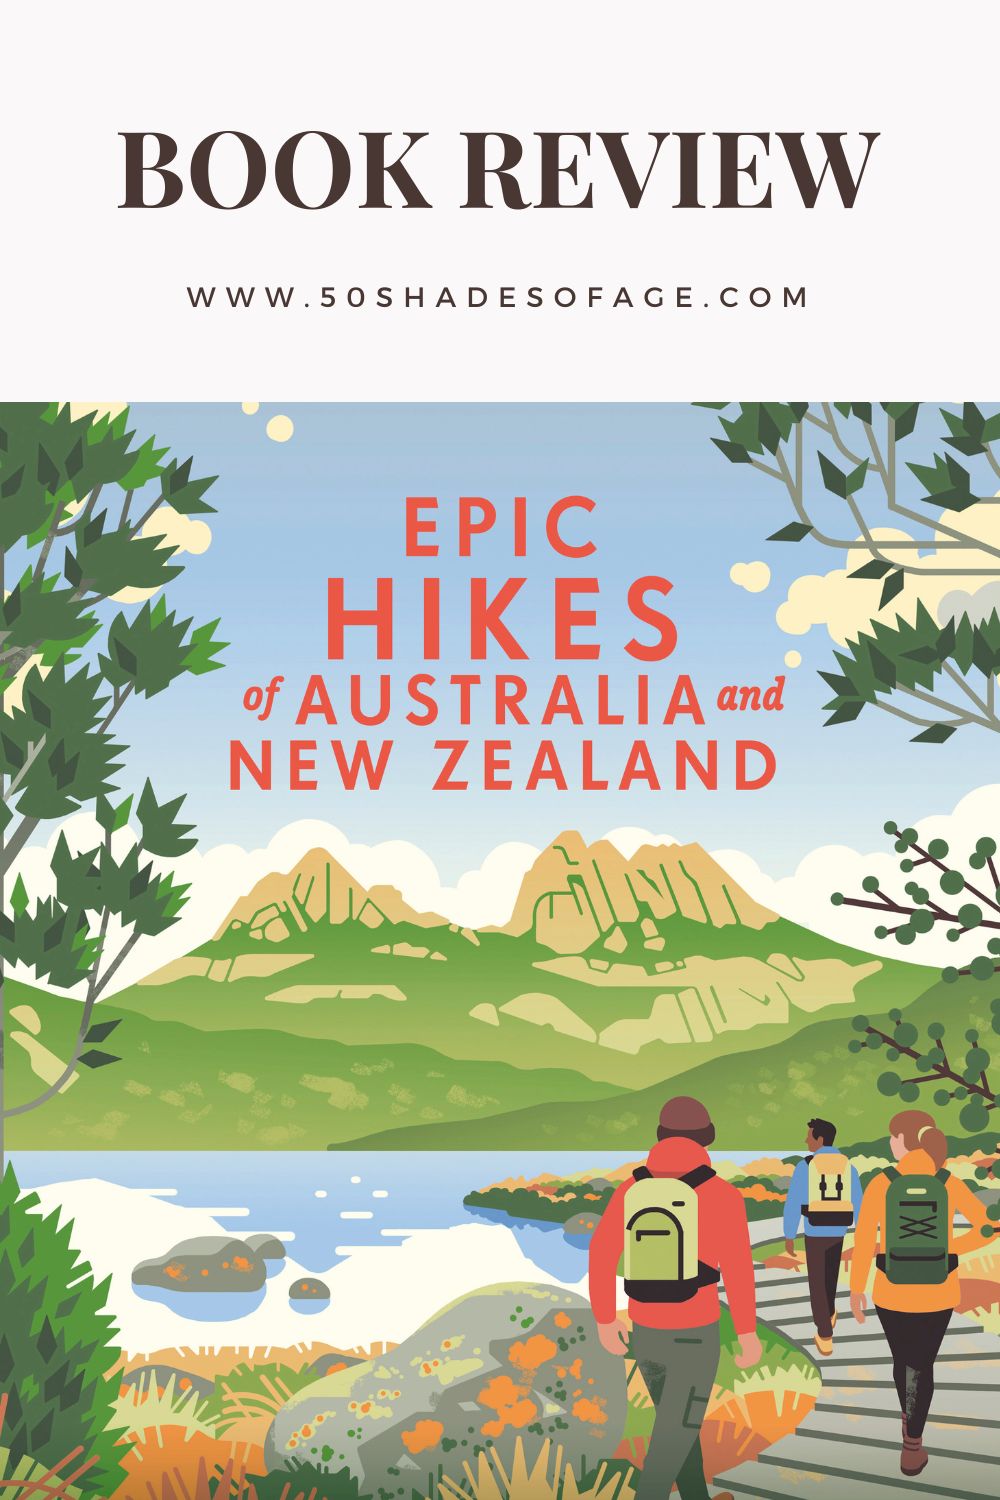 Book Review: Epic Hikes of Australia & New Zealand